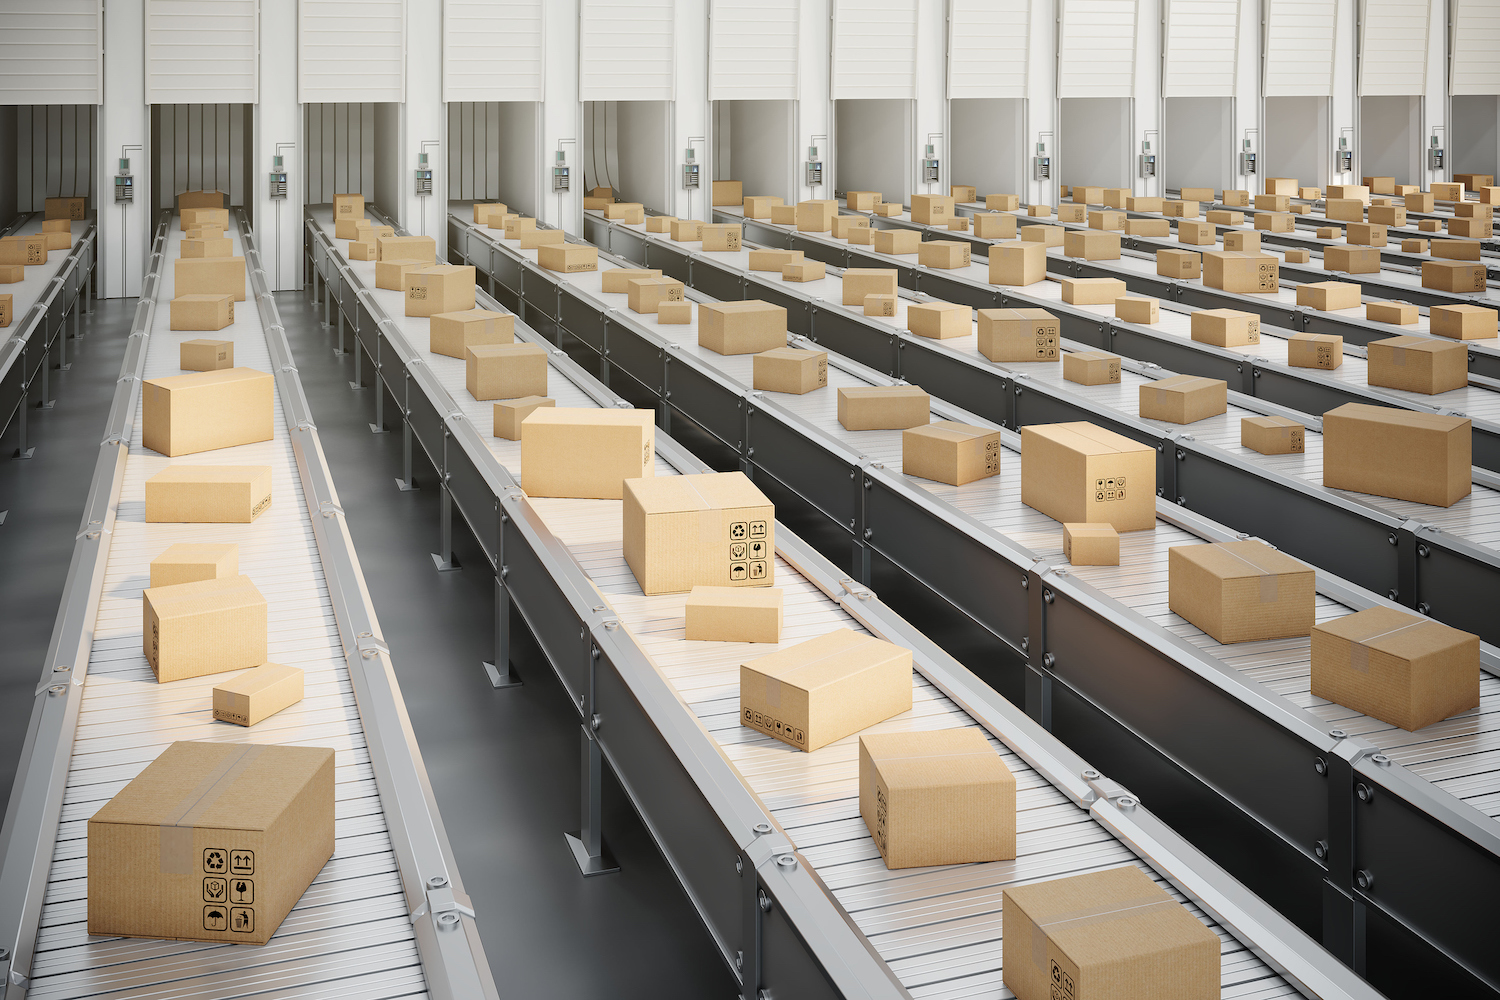 Boxes on conveyor belt to the truck loading dock in shipping distribution warehouse.